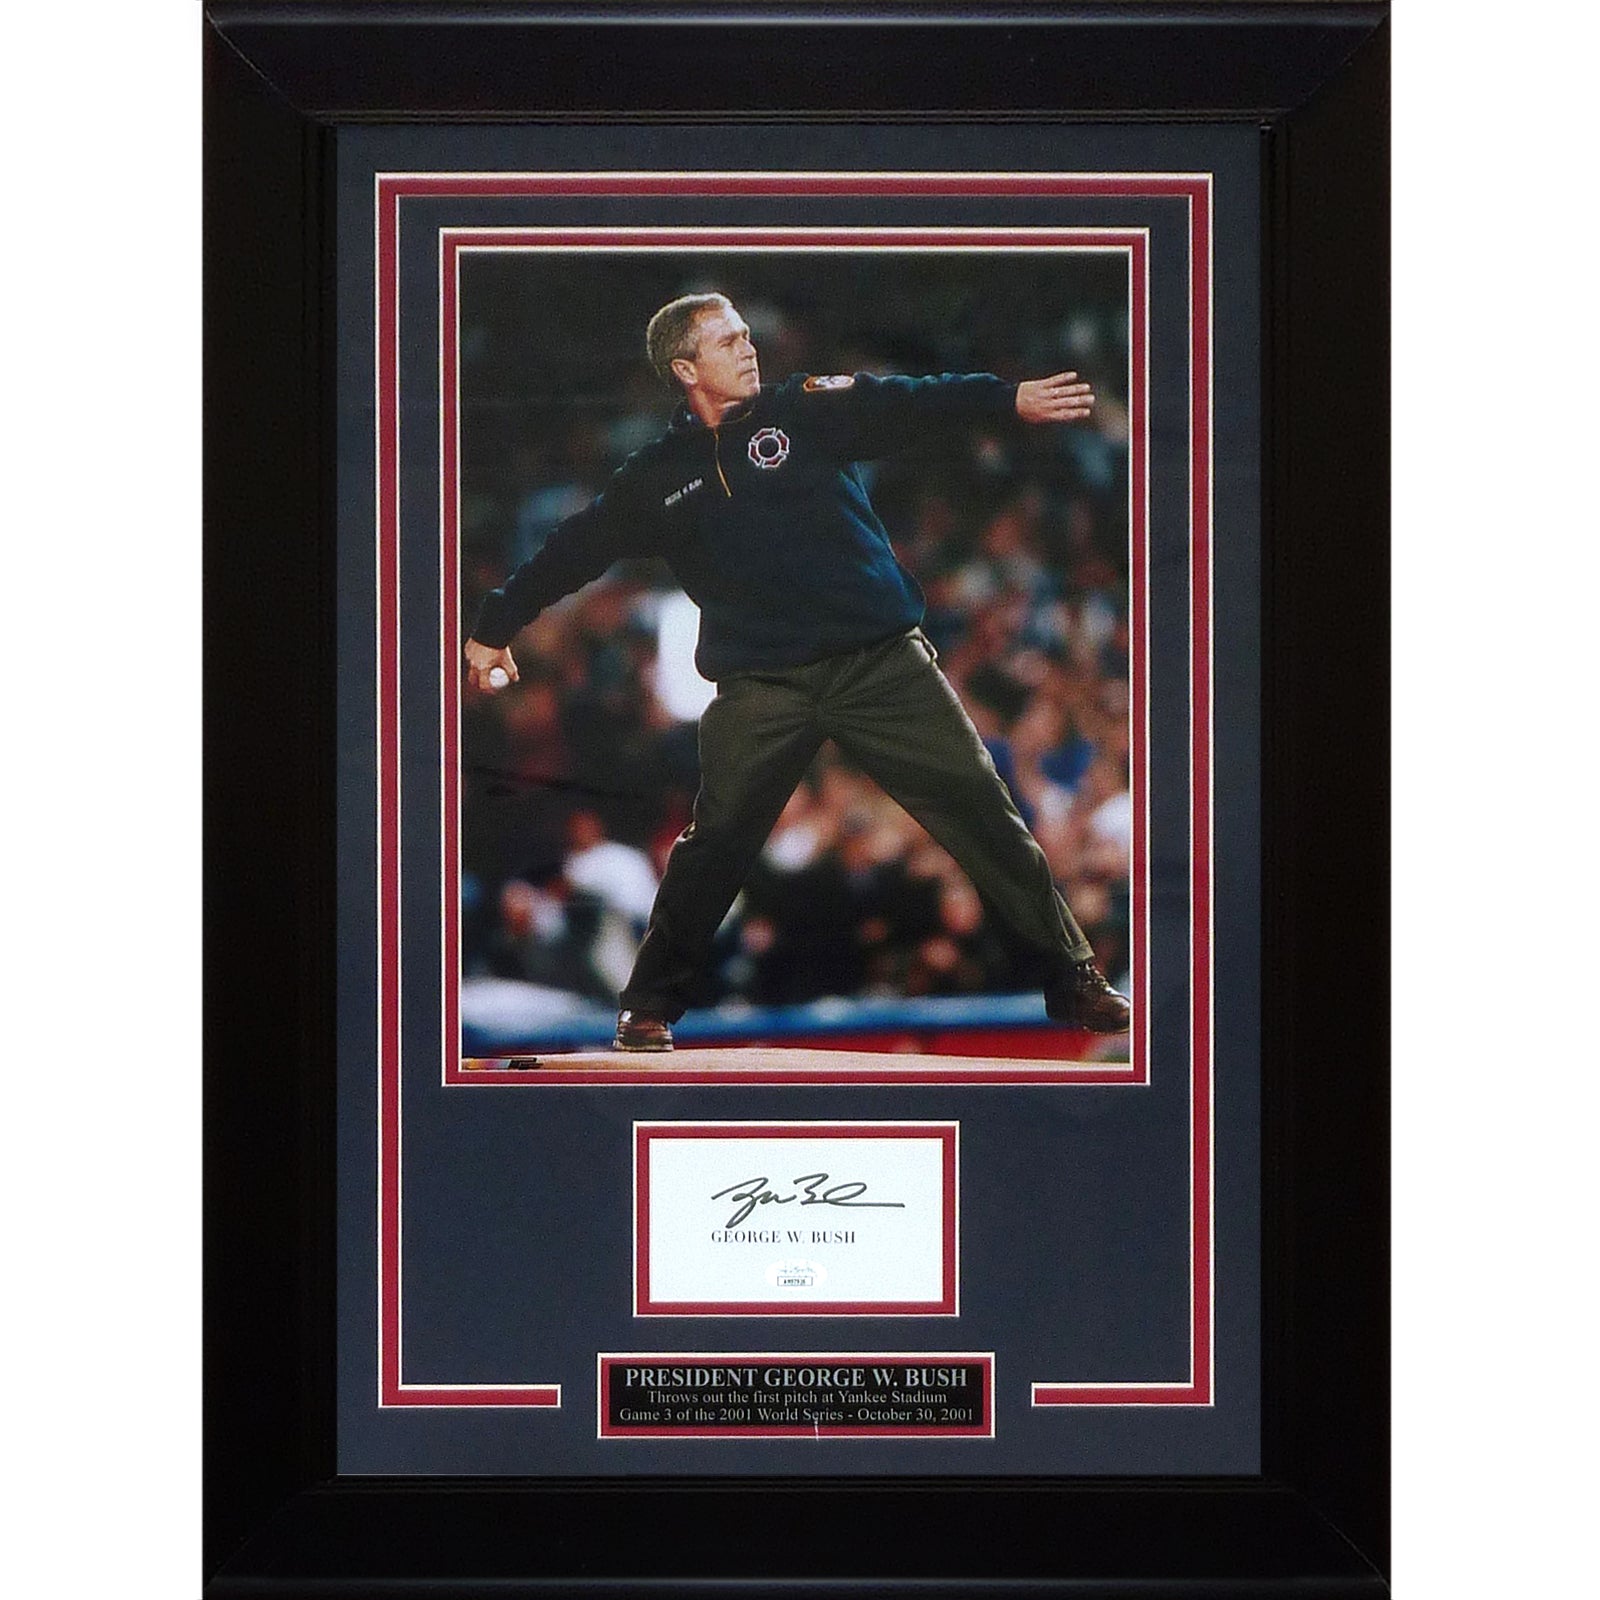 President George W. Bush Throwing out First Pitch Deluxe Framed 11x14 Photo with Autograph - JSA